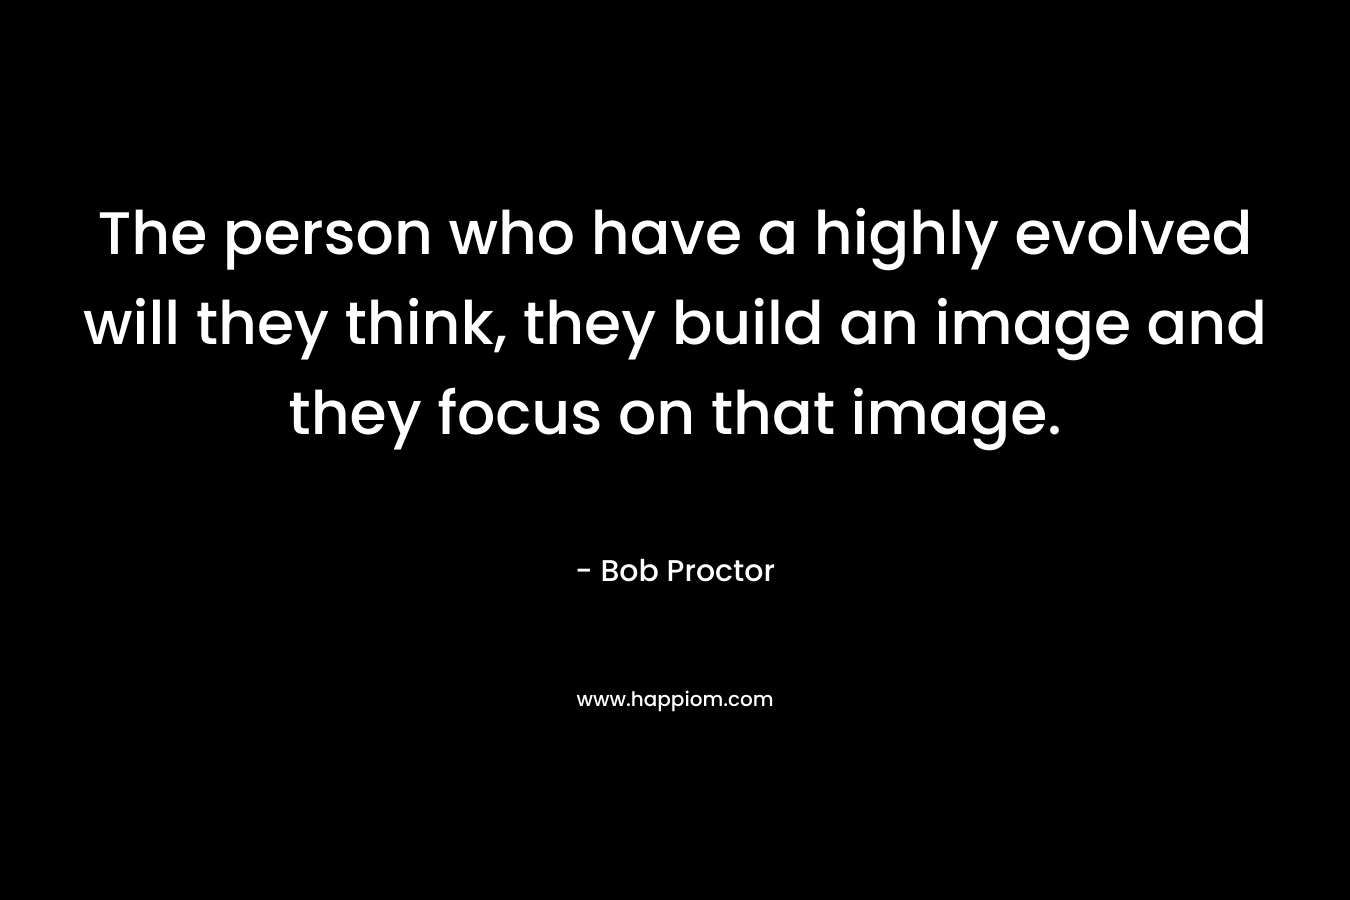 The person who have a highly evolved will they think, they build an image and they focus on that image.